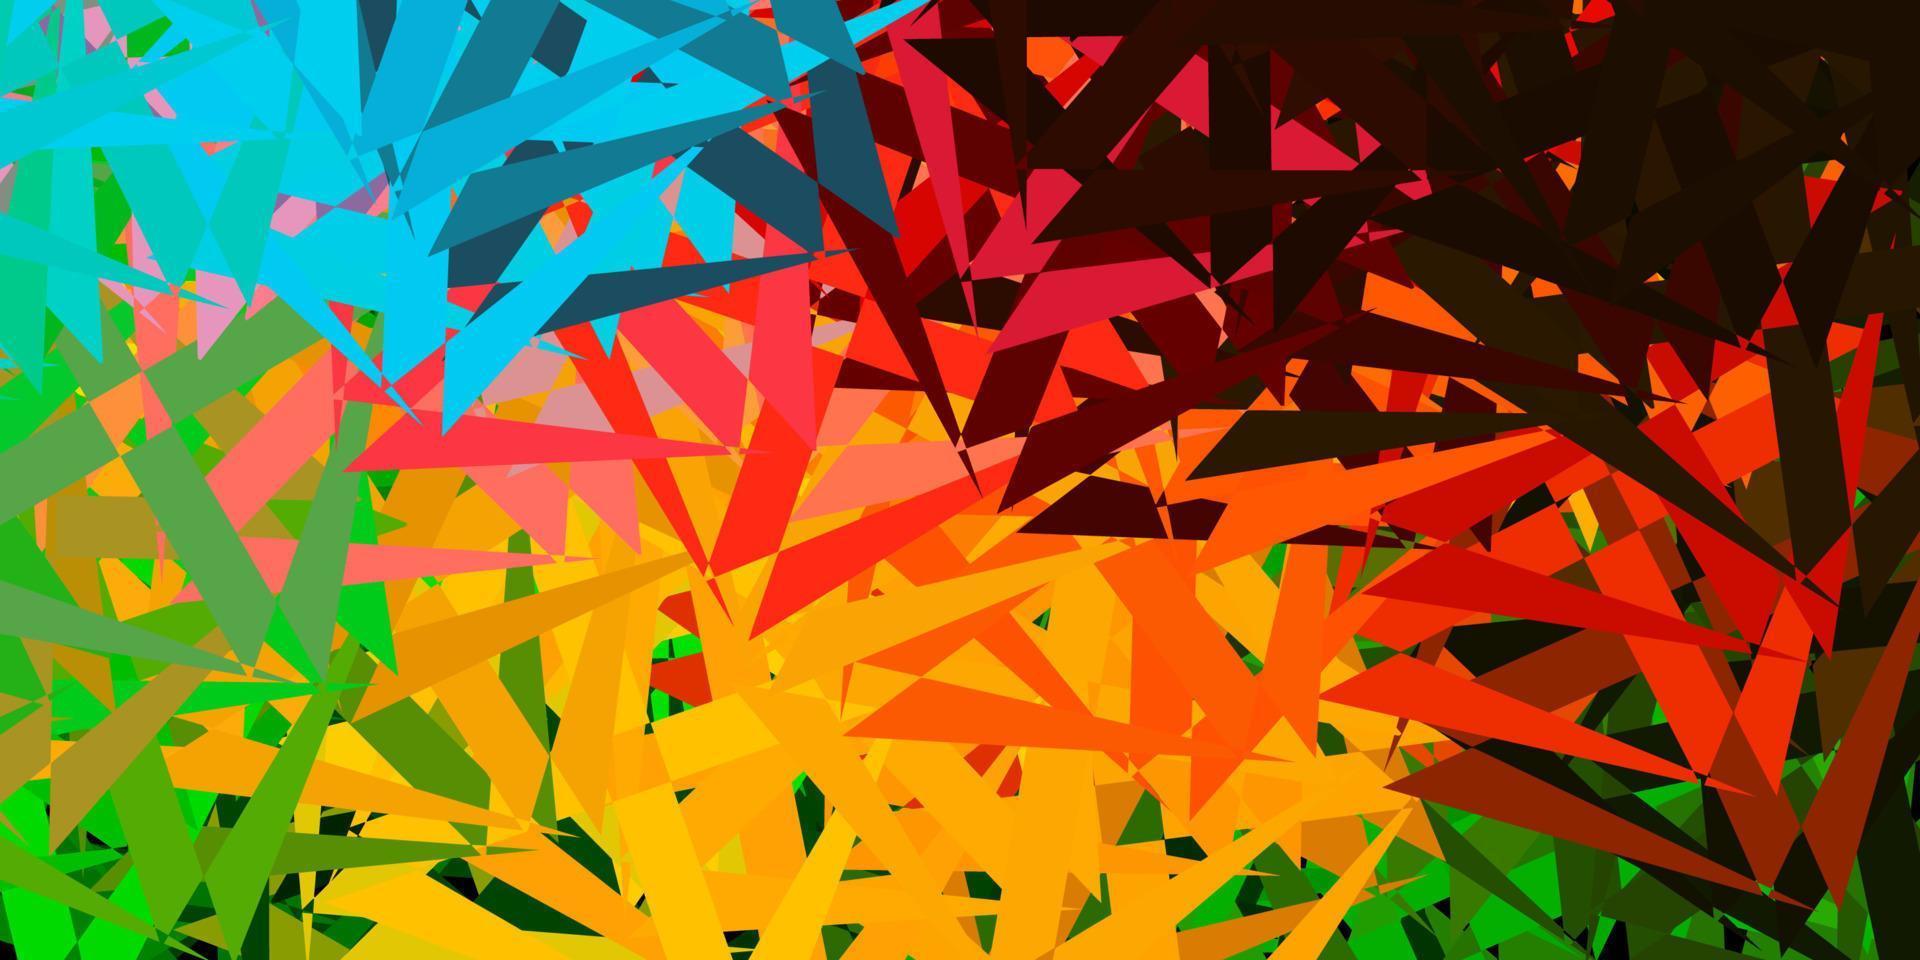 Light multicolor vector pattern with polygonal shapes.